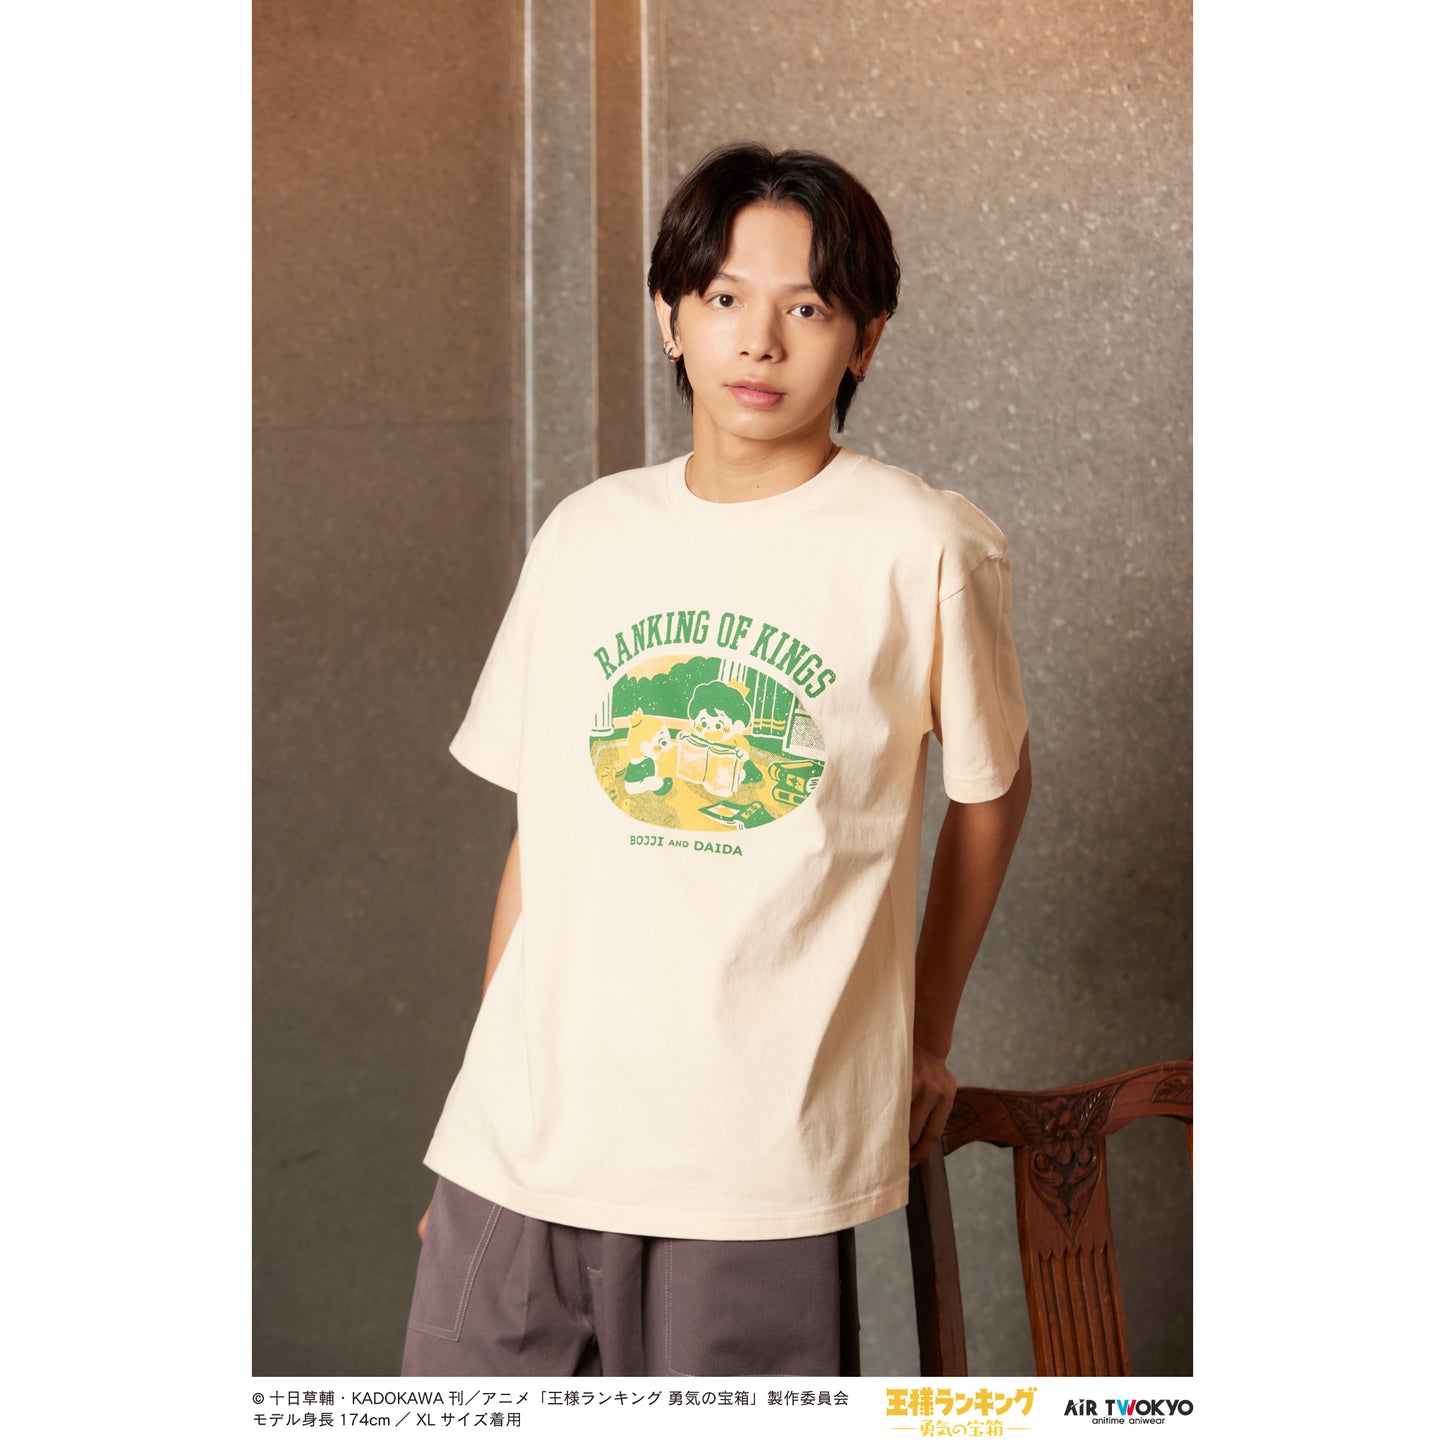 “Ranking of Kings: The Treasure Chest of Courage” scene illustration T-shirt 3